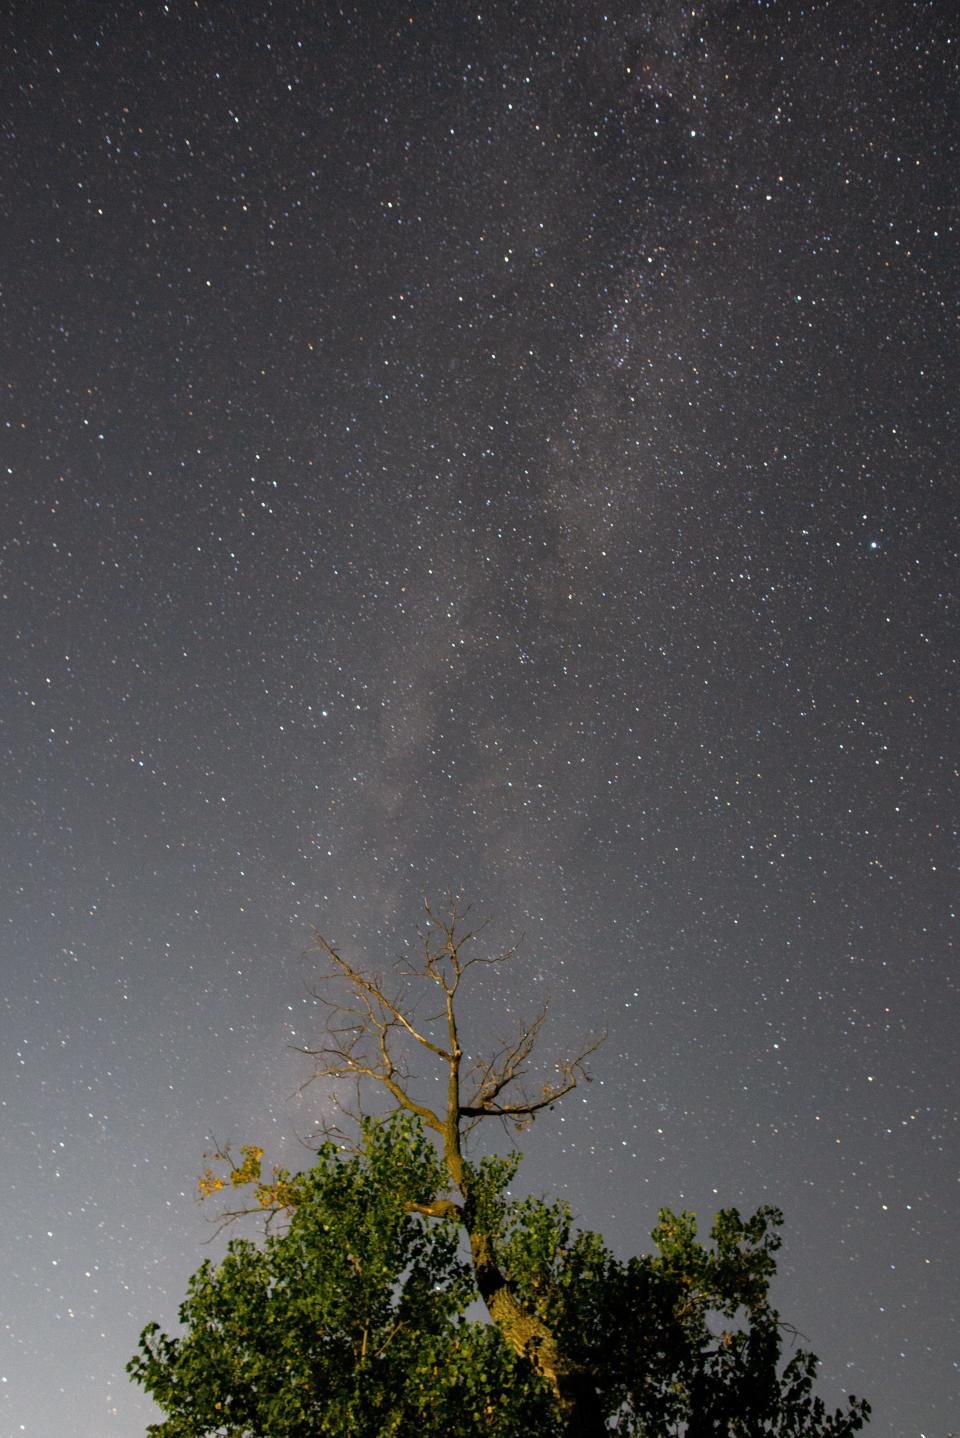 The Milky Way Galaxy is seen above a large cottonwood tree illuminated by a nearby streetlight in northern Shawnee County.